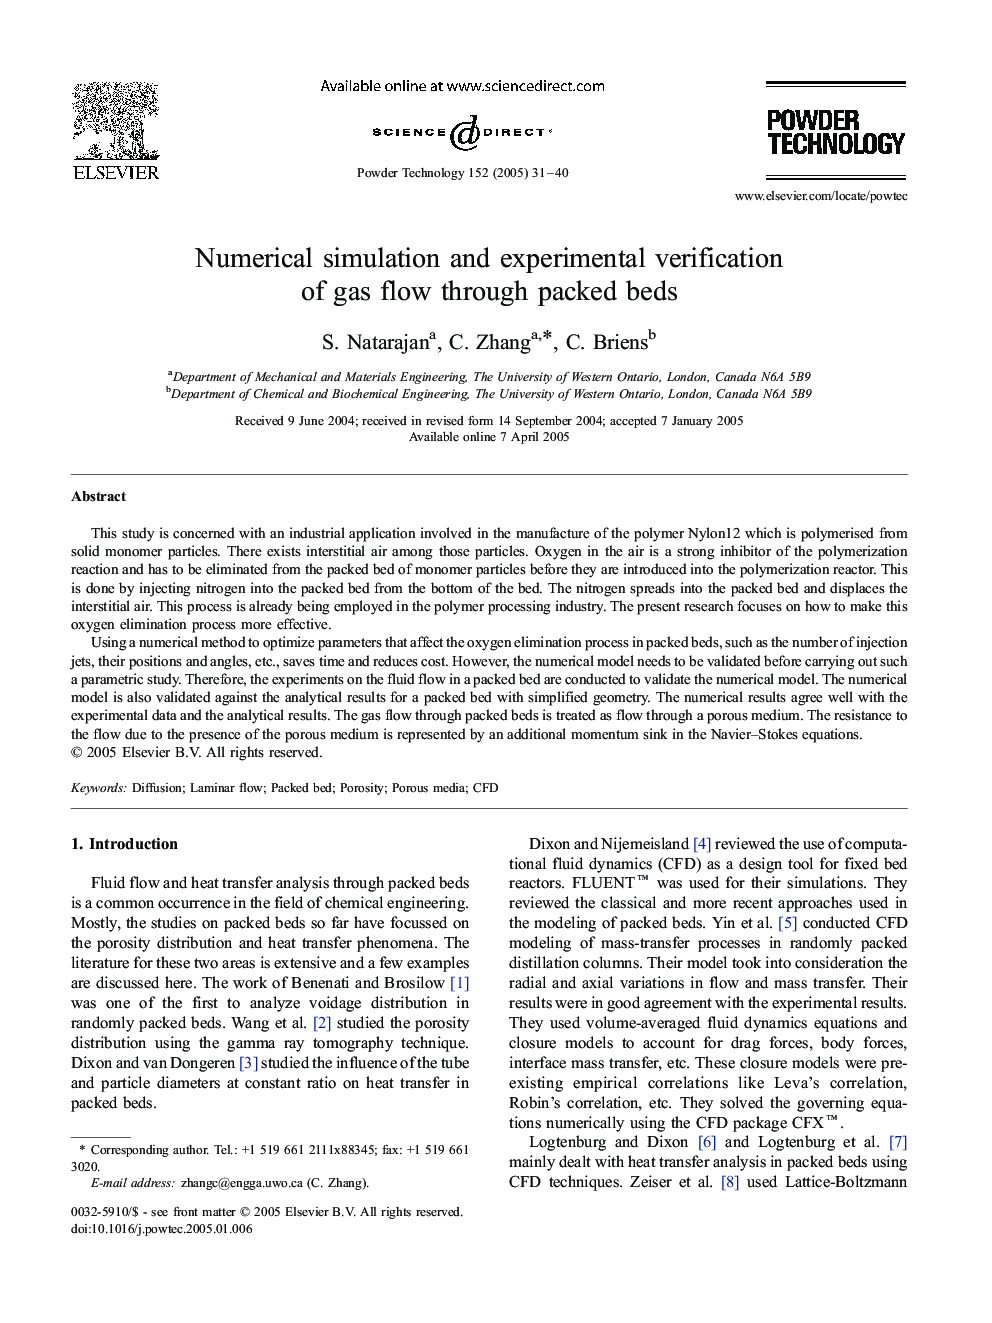 Numerical simulation and experimental verification of gas flow through packed beds